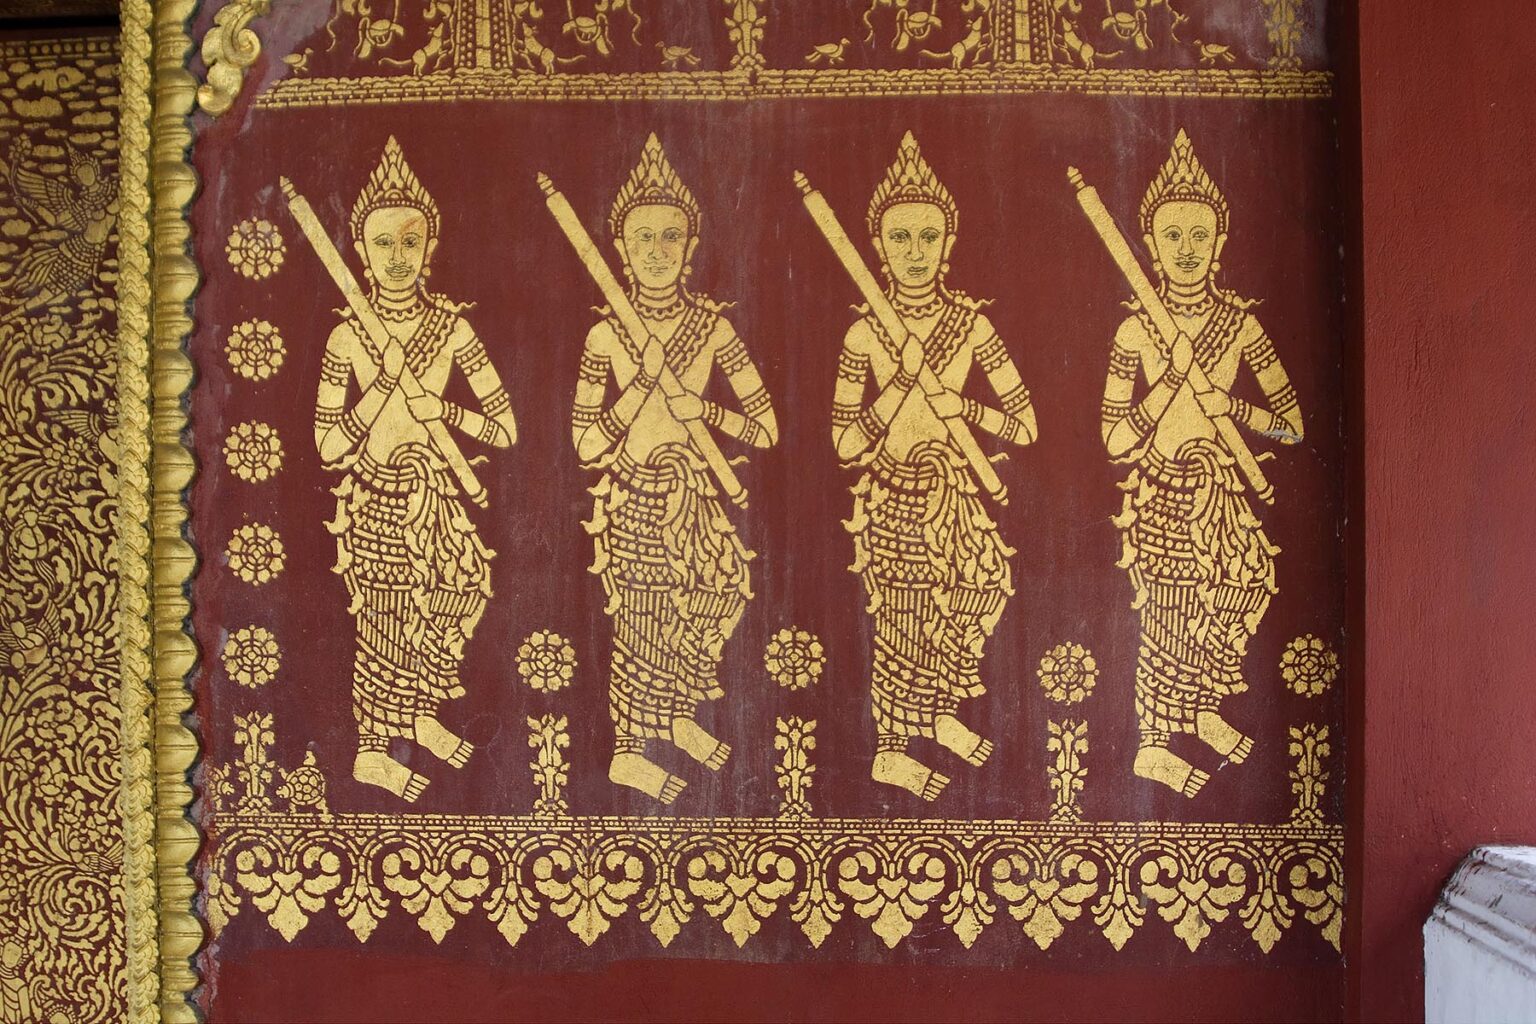 Four Buddhist deities are stenciled on the wall of Wat Si Bun Heuang in the former French Provincial town of LUANG PROBANG - LAOS